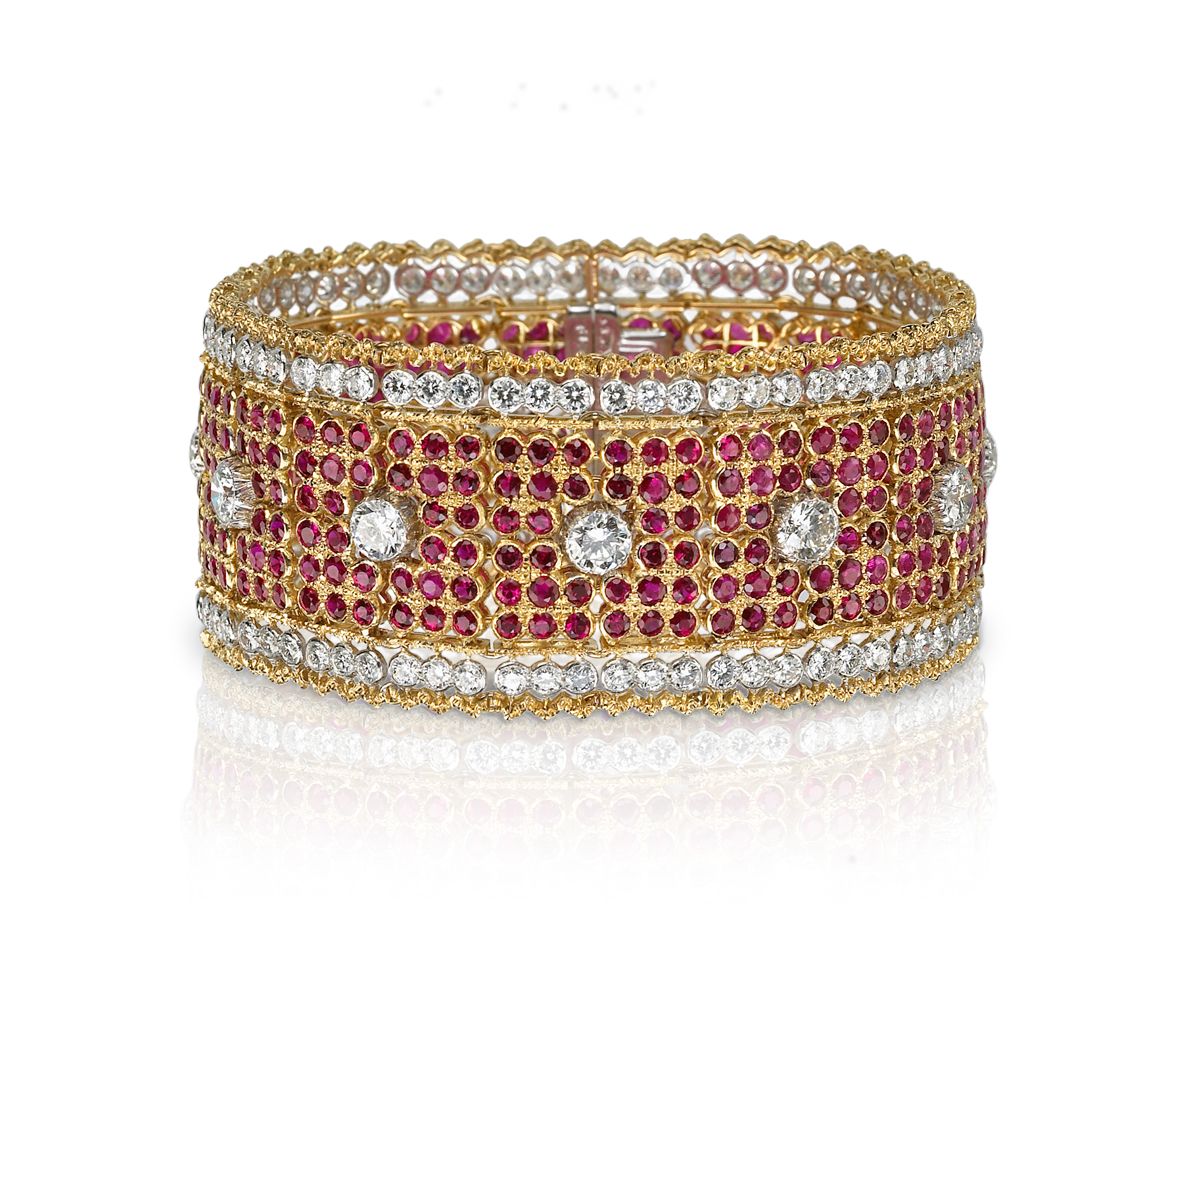 UNICA BRACELET IN WHITE AND YELLOW GOLD SET WITH DIAMONDS AND RUBIES BY BUCCELLATI